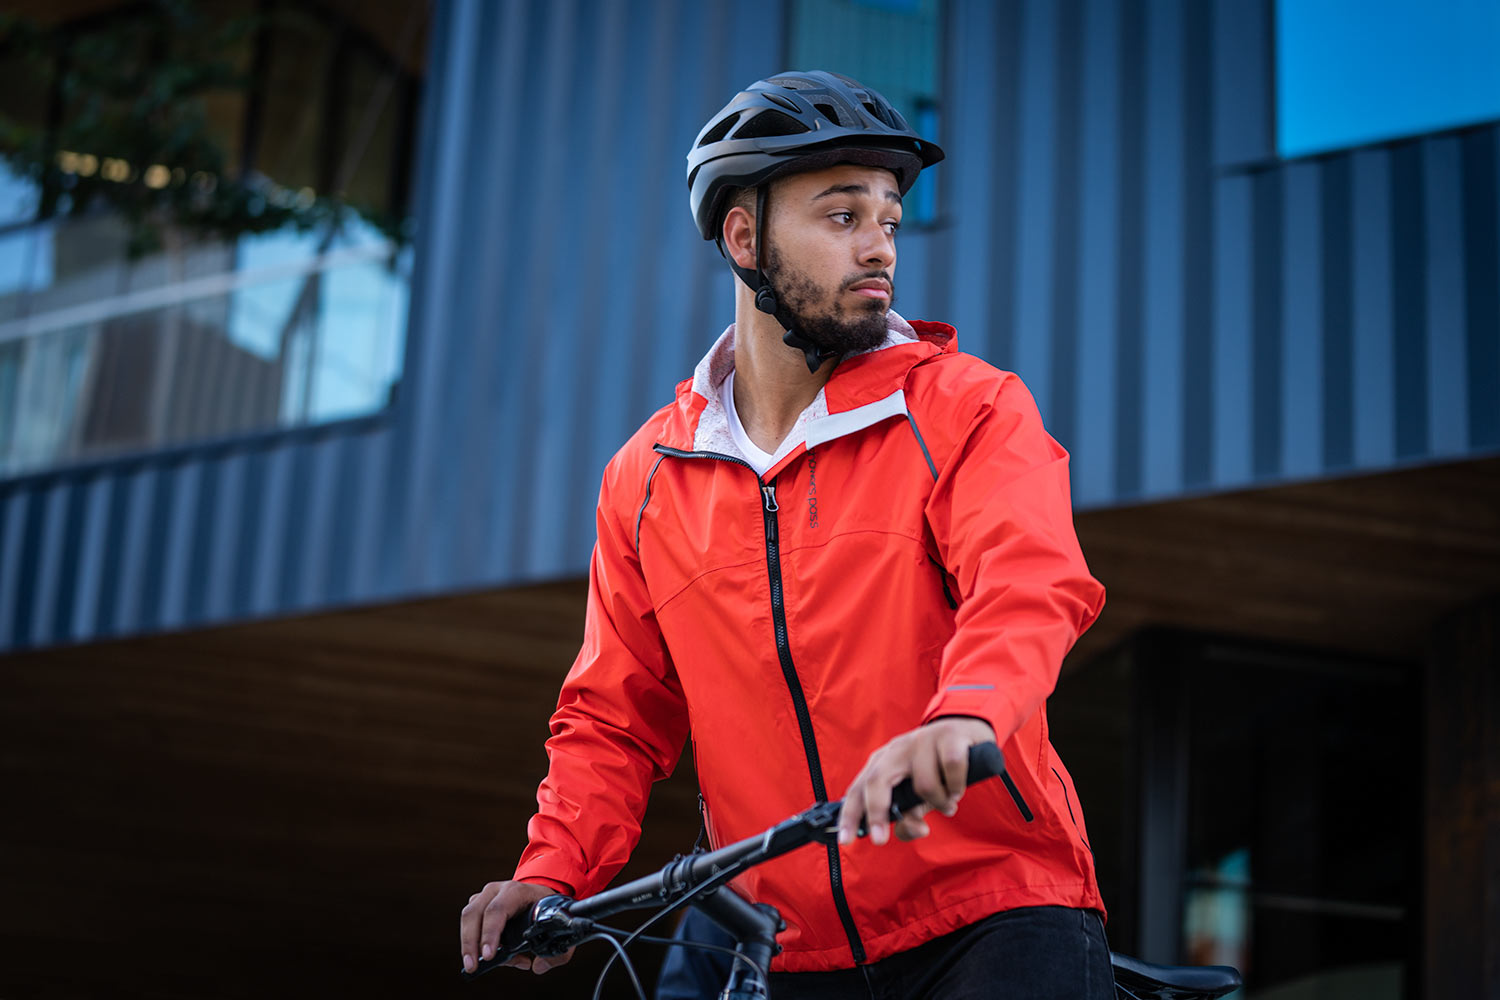 Men's Syncline CC Jacket - with sustainable clean color dyes